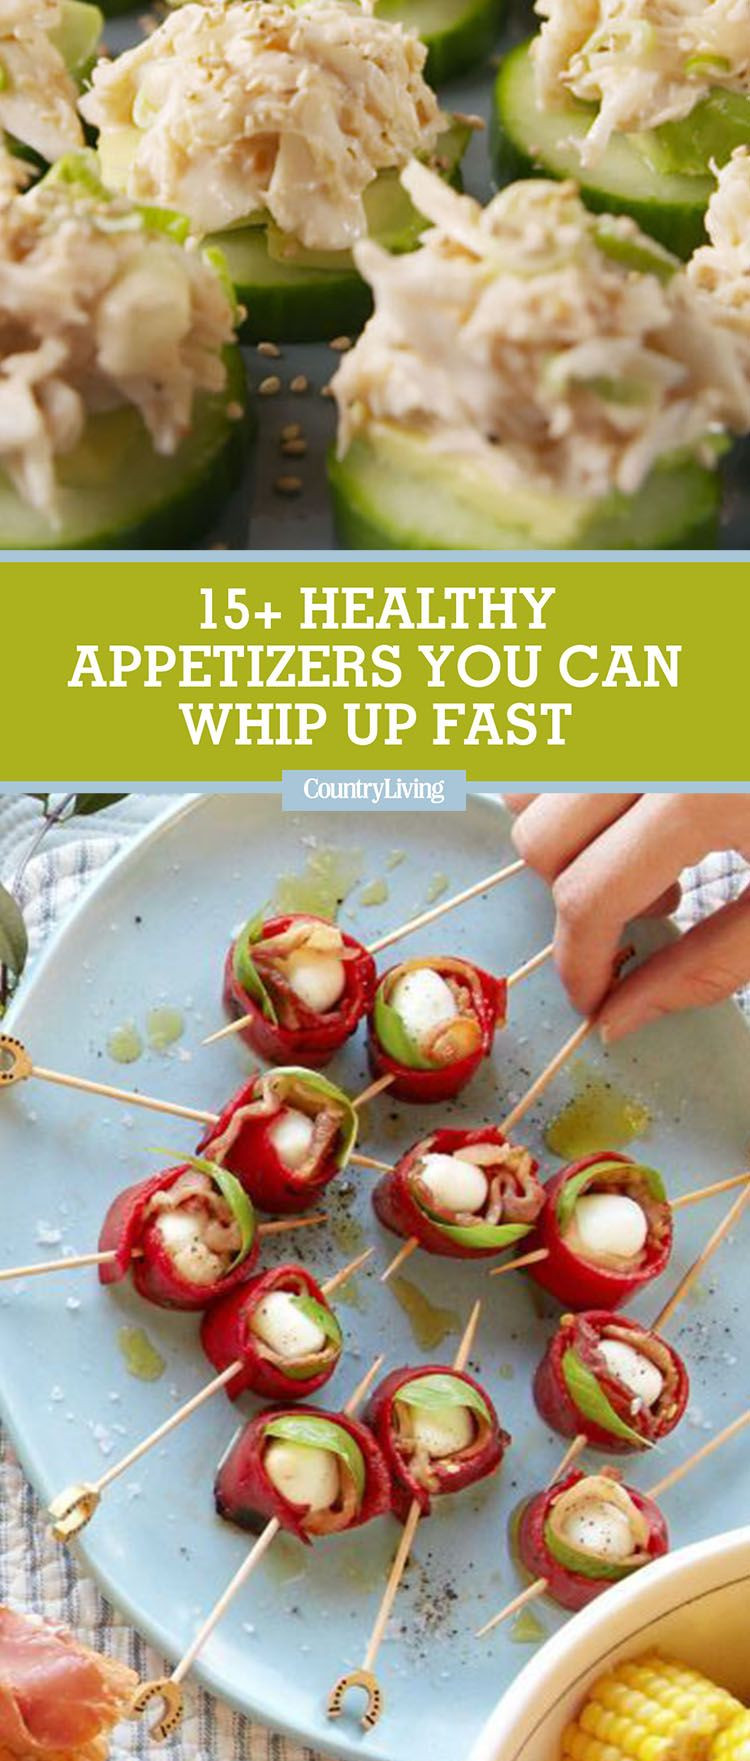 Healthy Appetizers For Kids
 15 Healthy Appetizers You Can Whip Up Fast